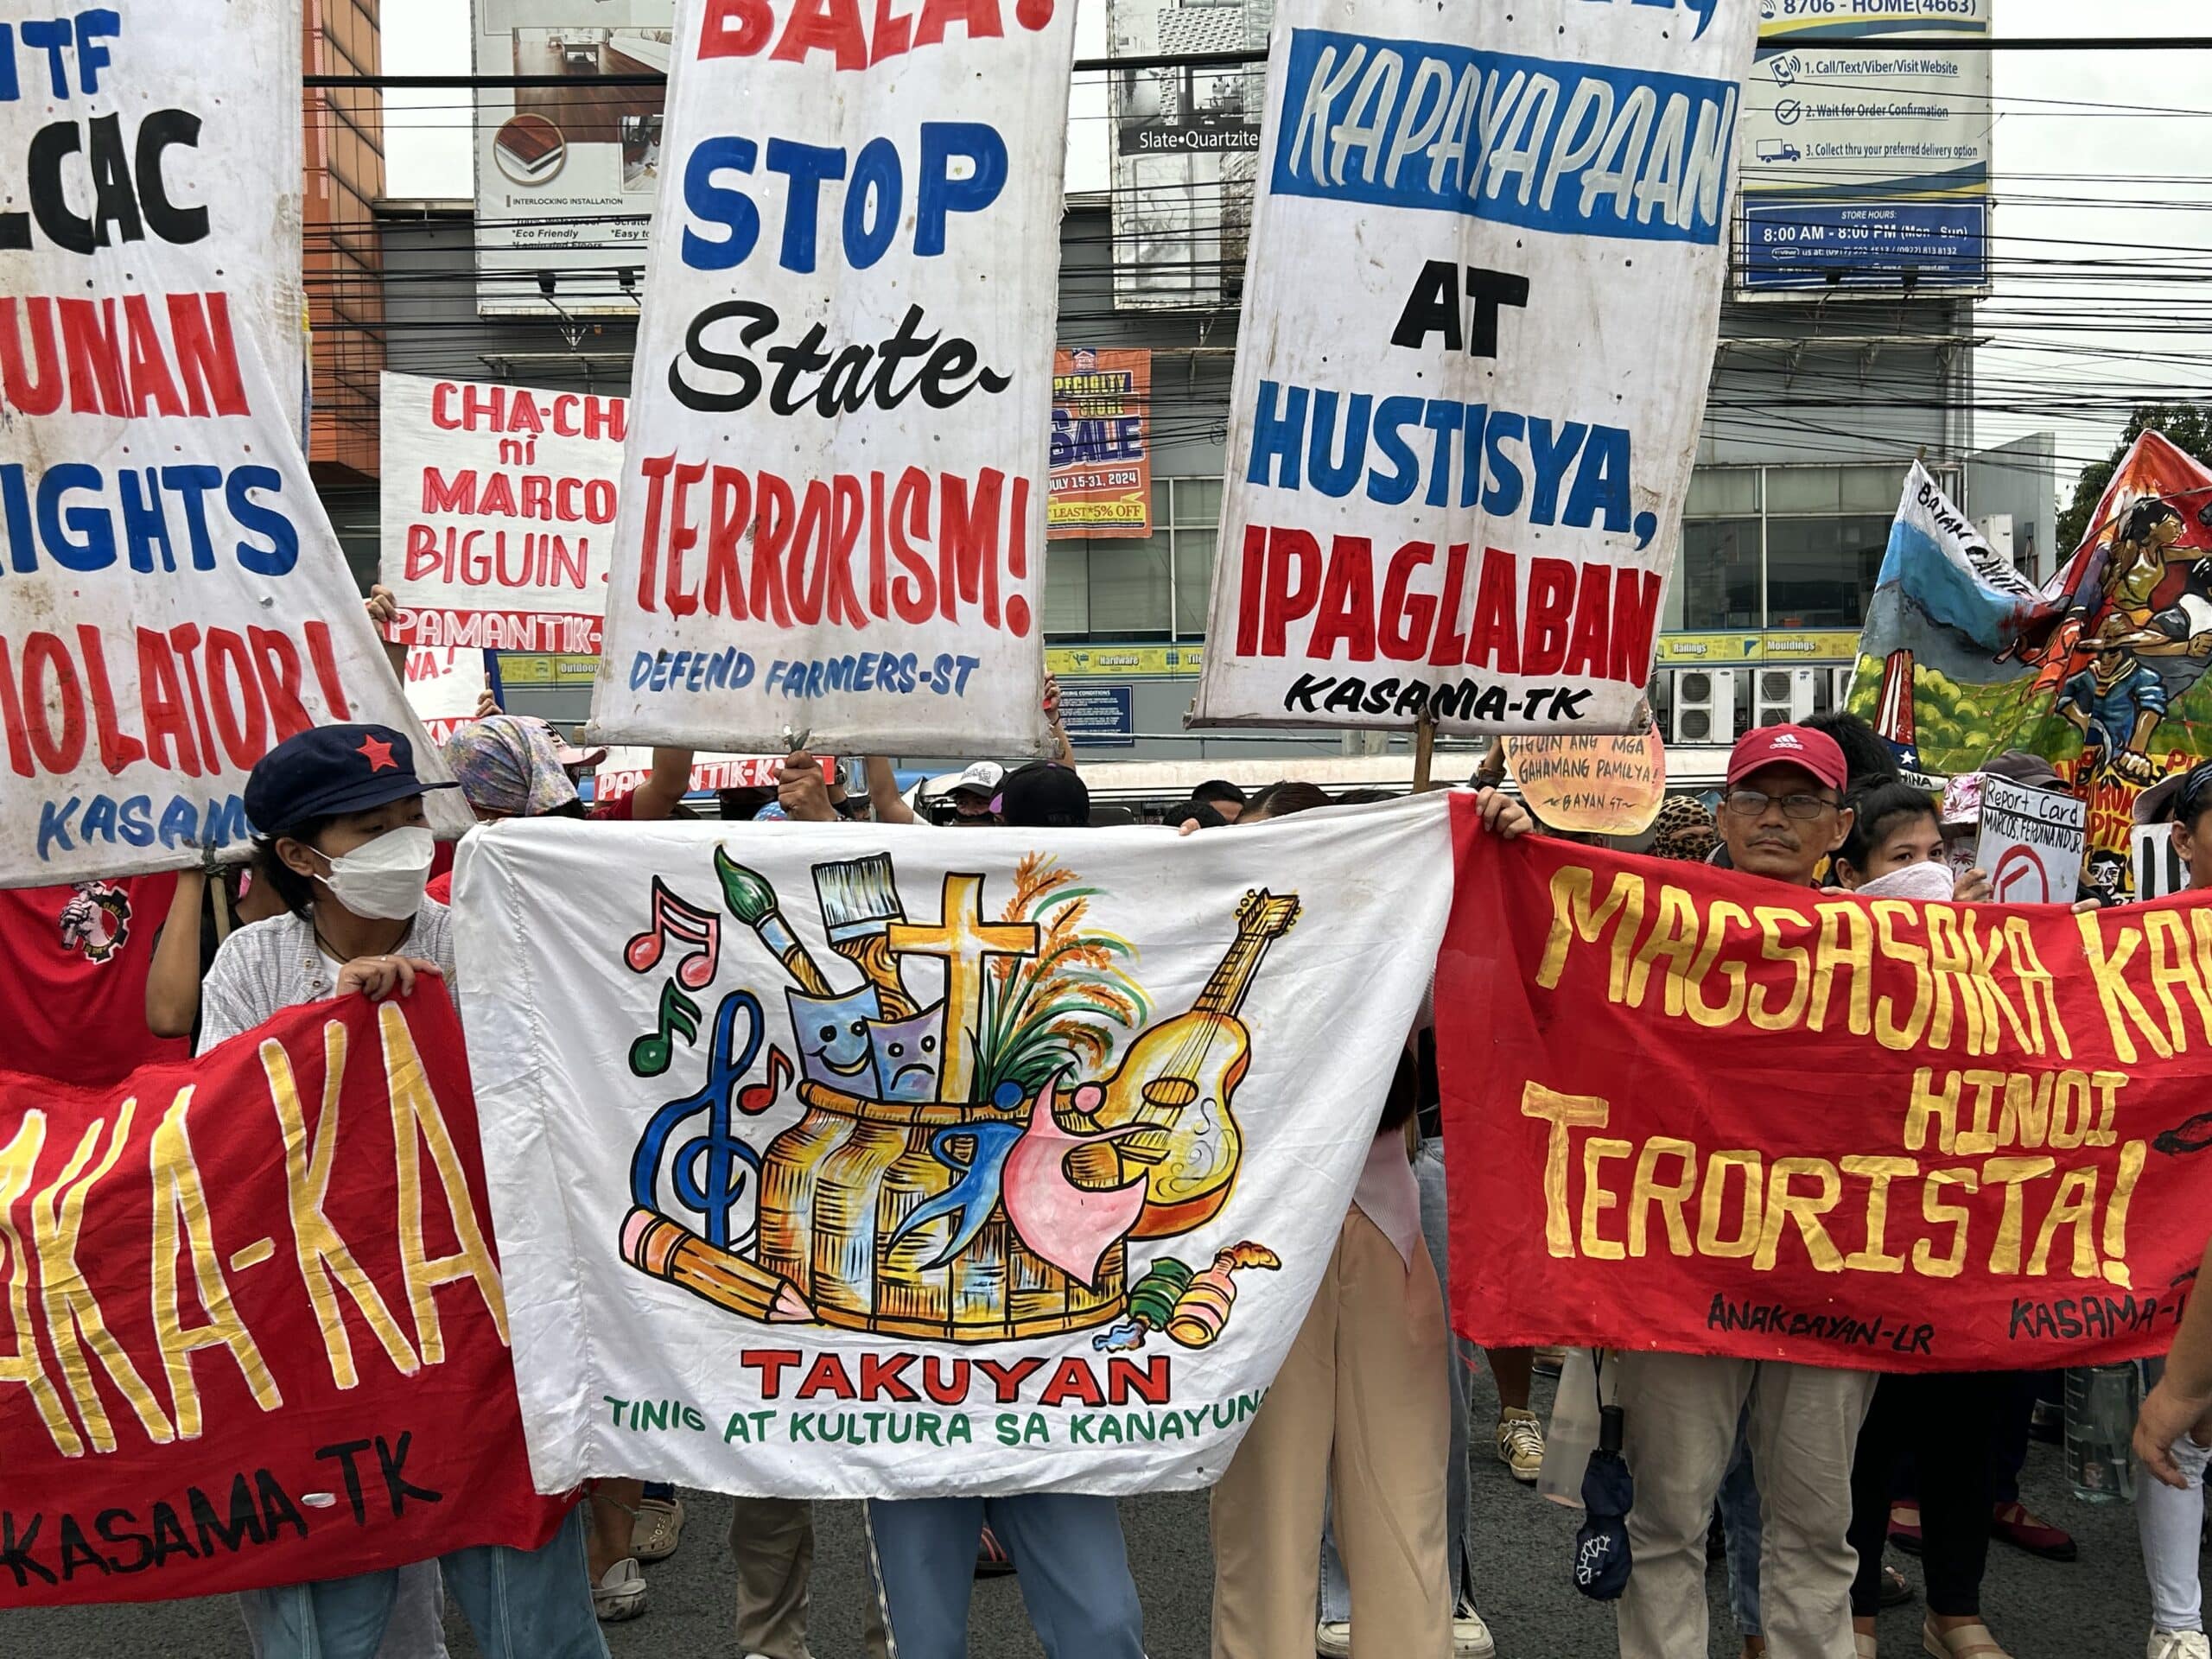 Protesters gather along Commonwealth ahead of Marcos' 3rd Sona